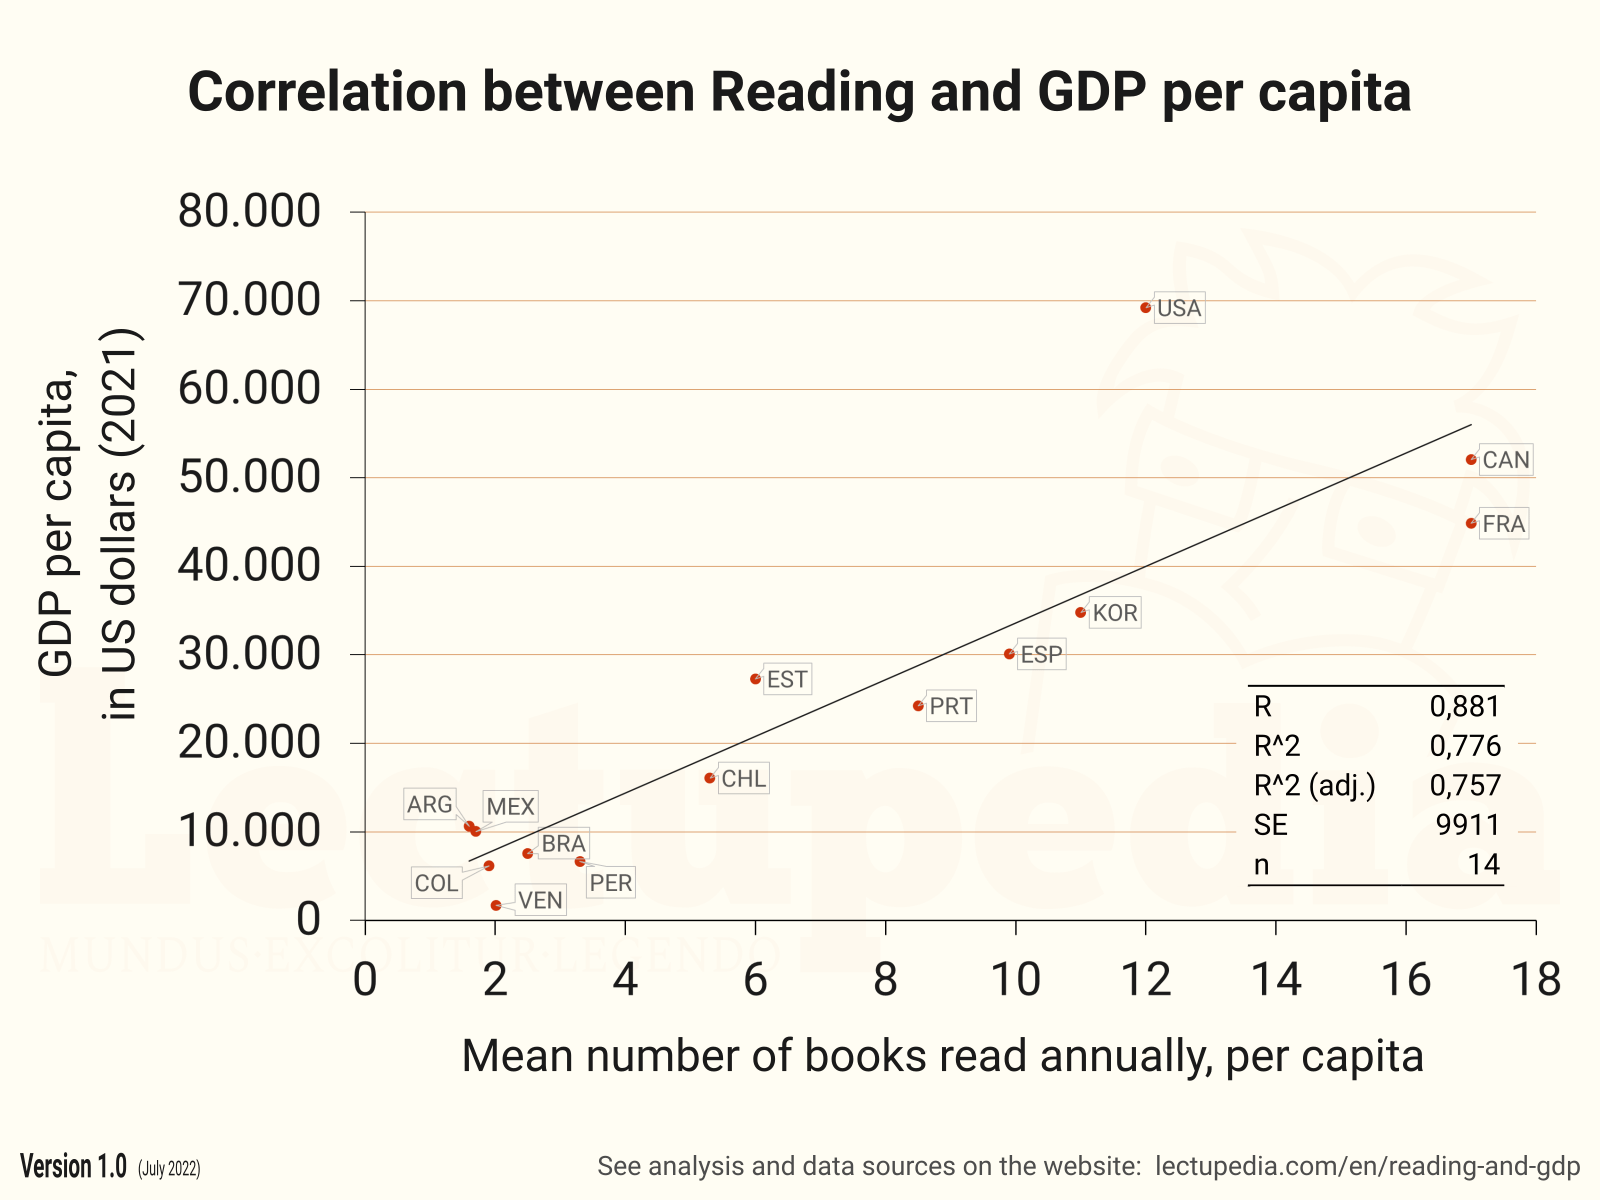 Scatterplot for the Correlation between Reading and GDP.